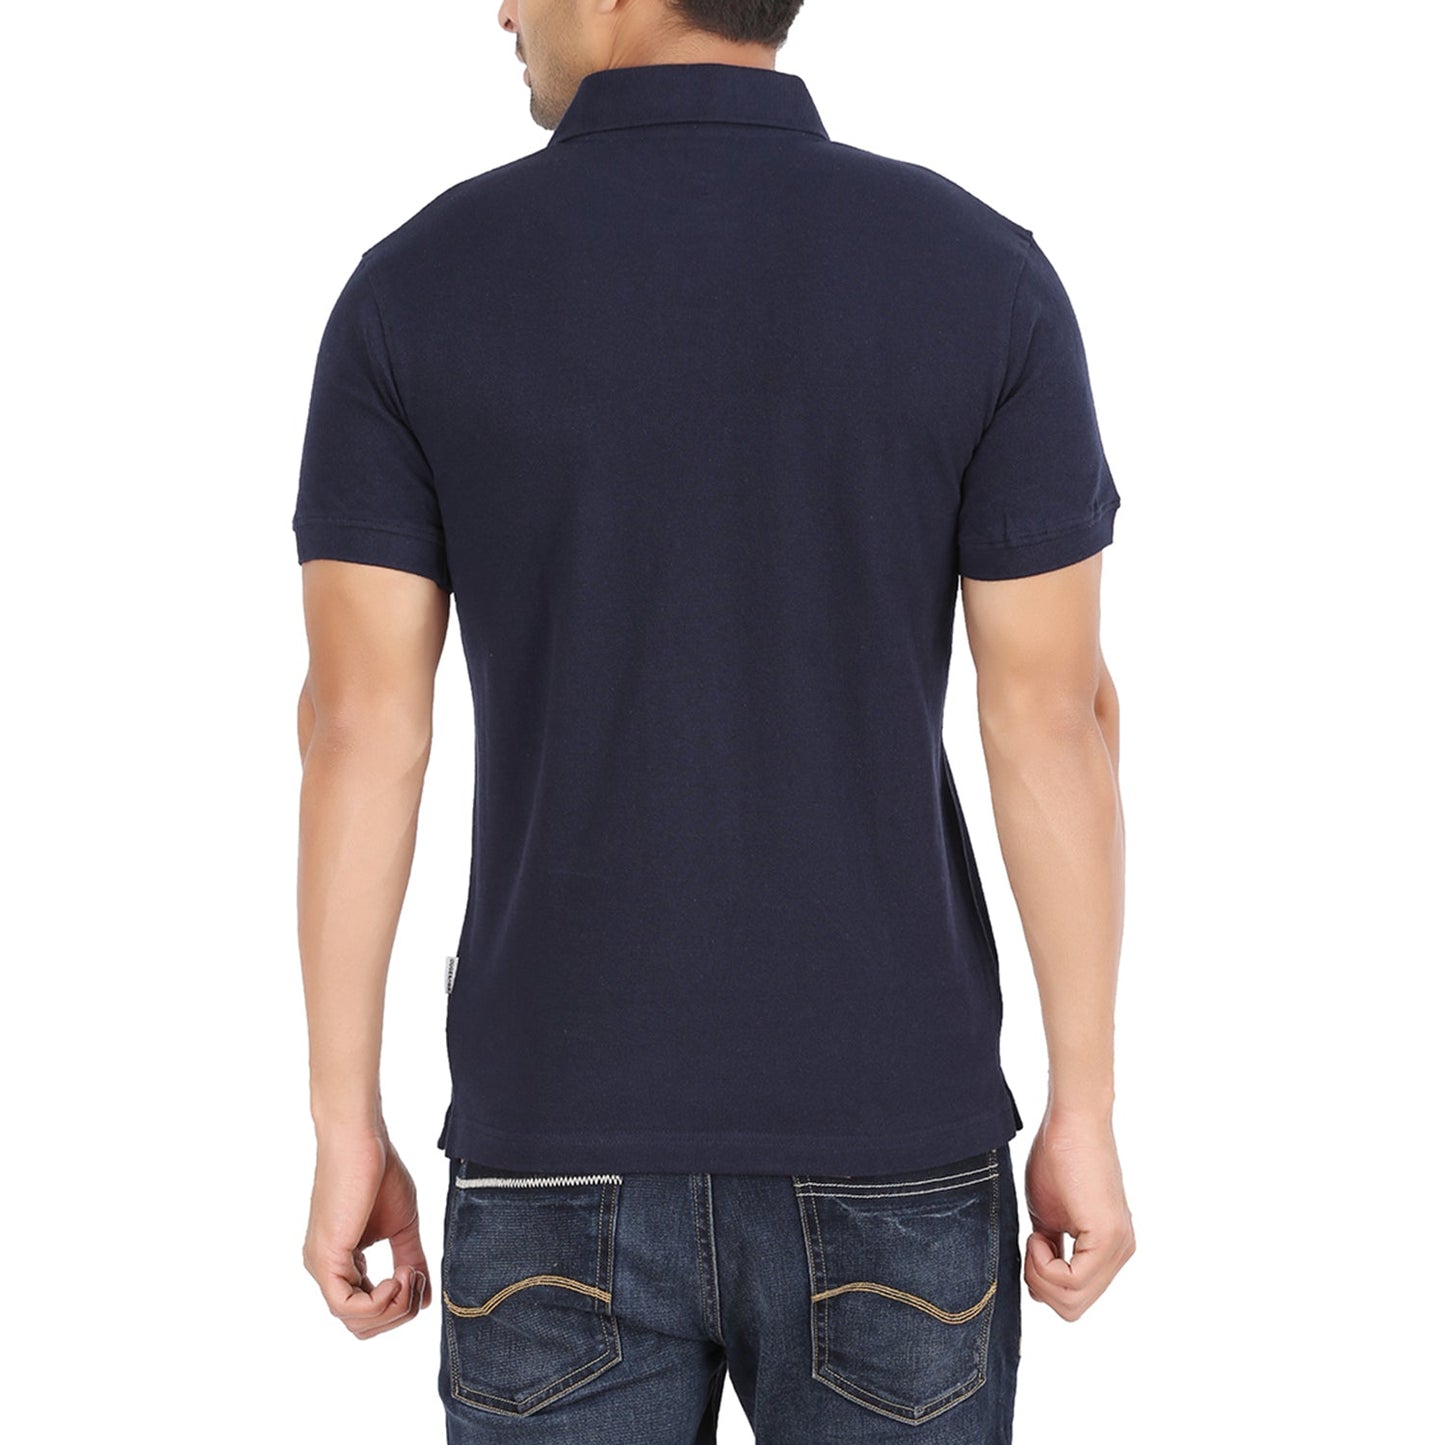 Navy Blue Polo Tshirt With Pocket-Style #0705